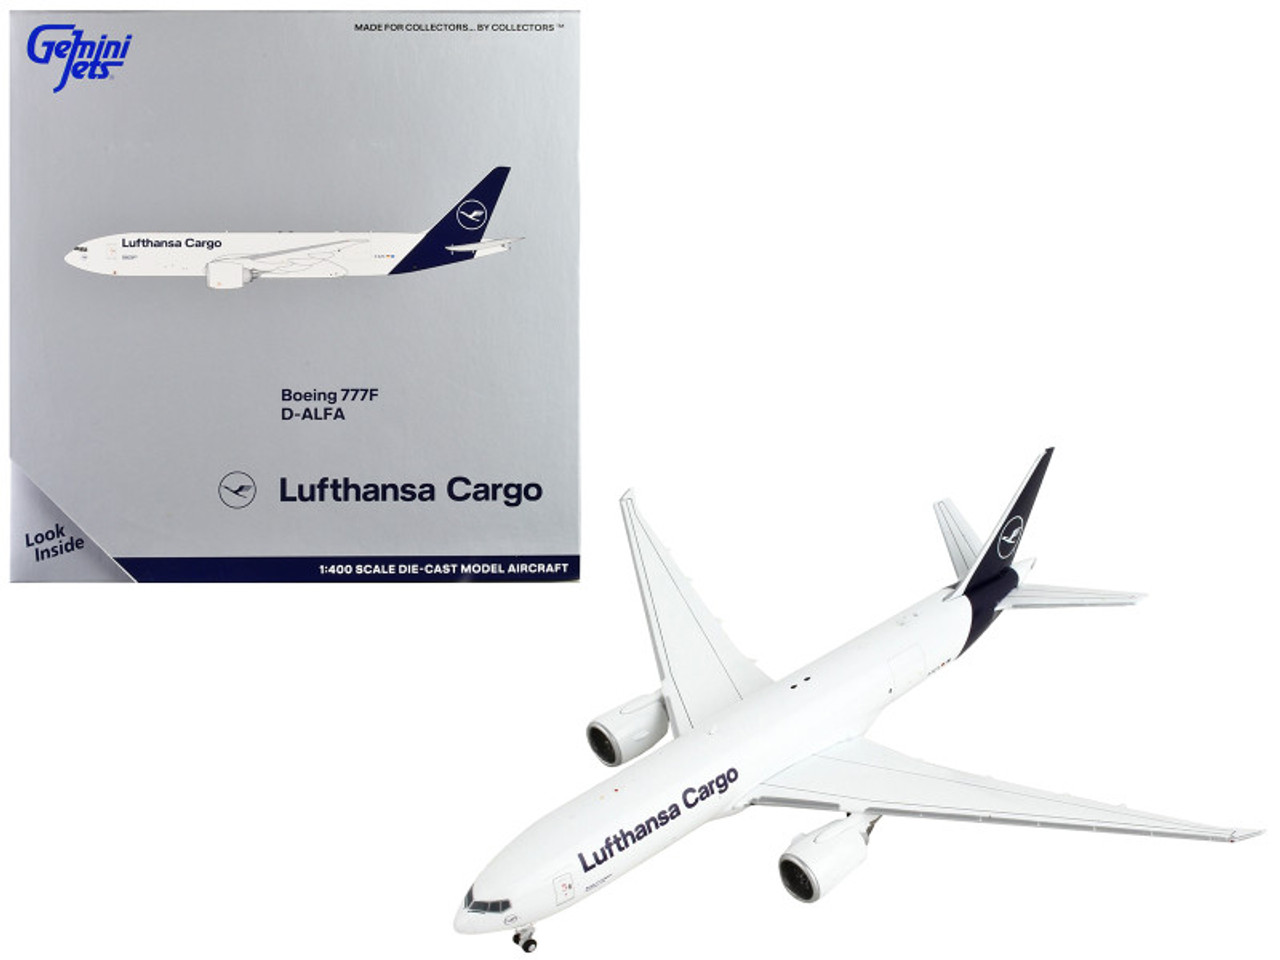 Boeing 777F Commercial Aircraft "Lufthansa Cargo" White with Dark Blue Tail 1/400 Diecast Model Airplane by GeminiJets